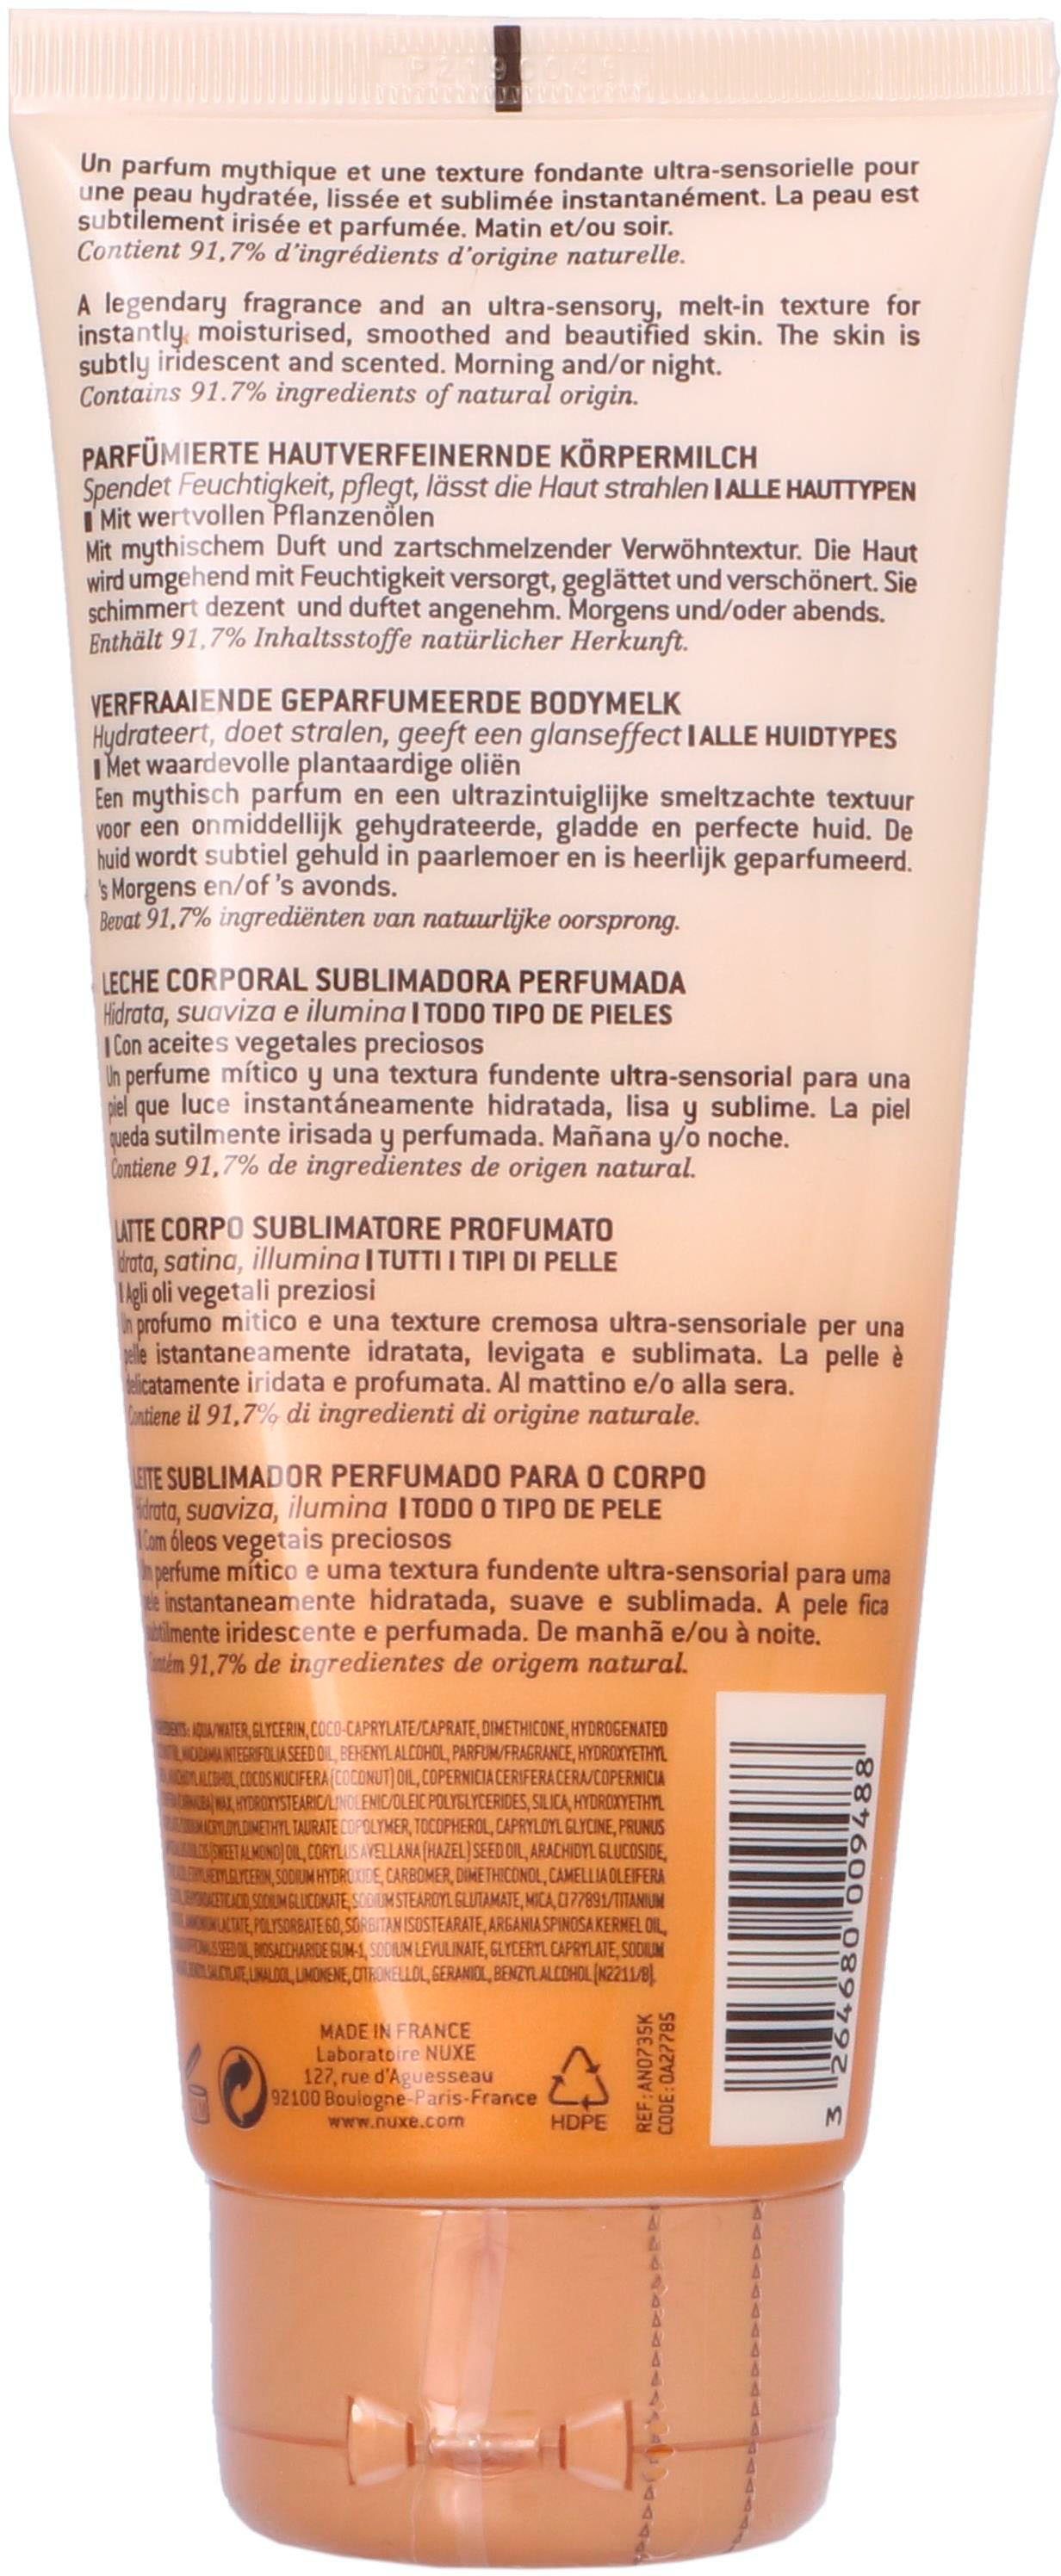 Nuxe Lotion Bodylotion Prodigieux Scented Lait Beautyfying Body